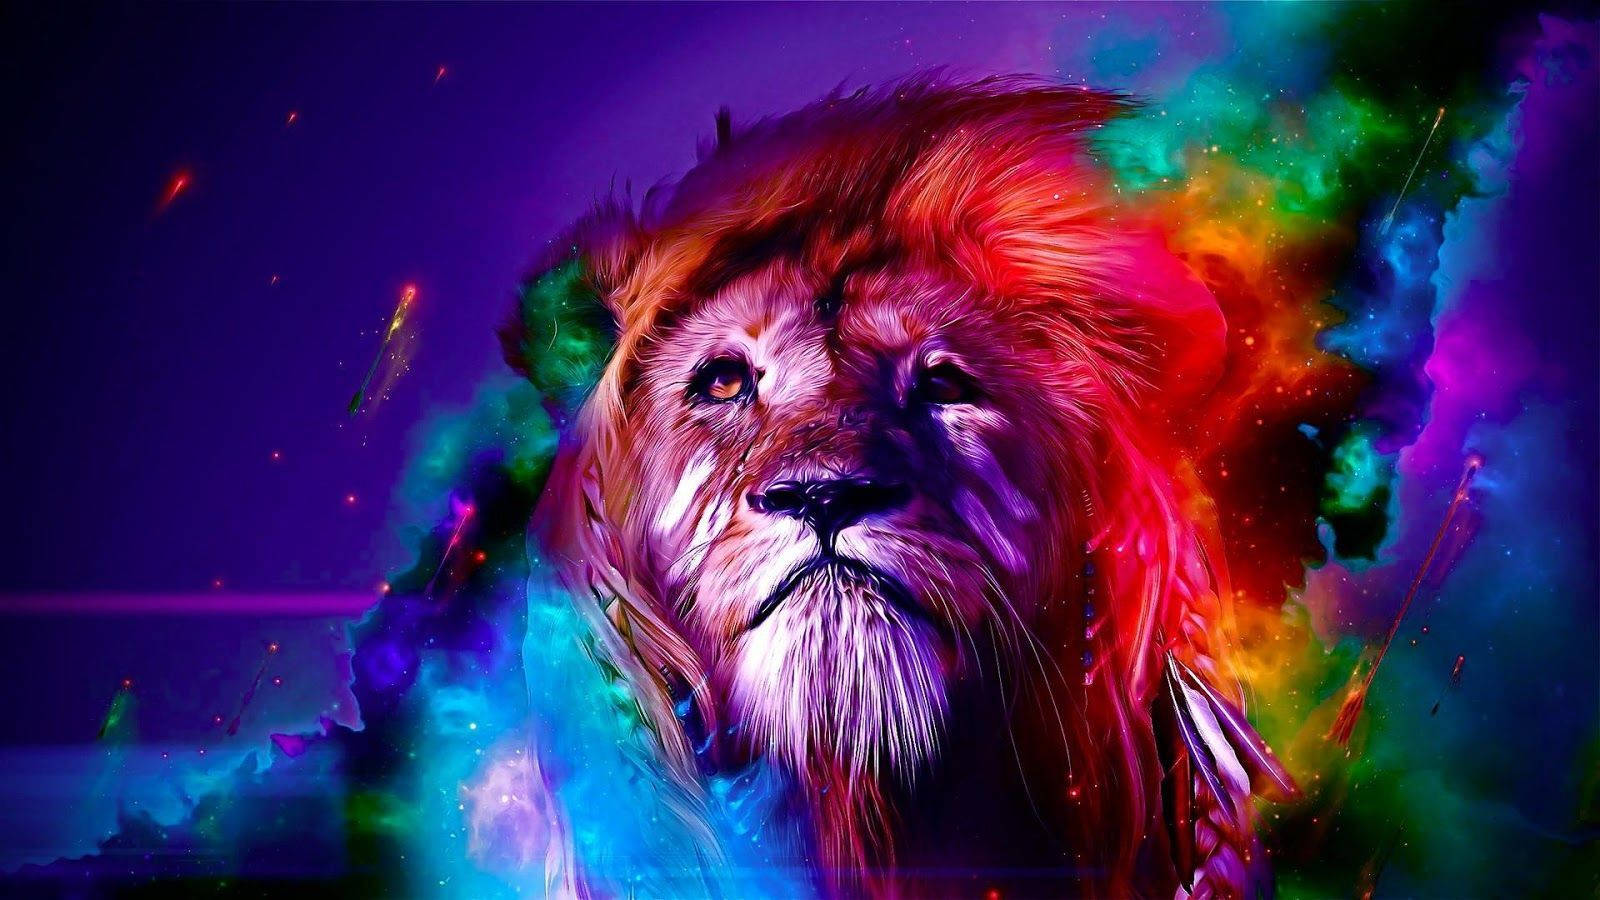 Colorful Art Lion Galaxy Background